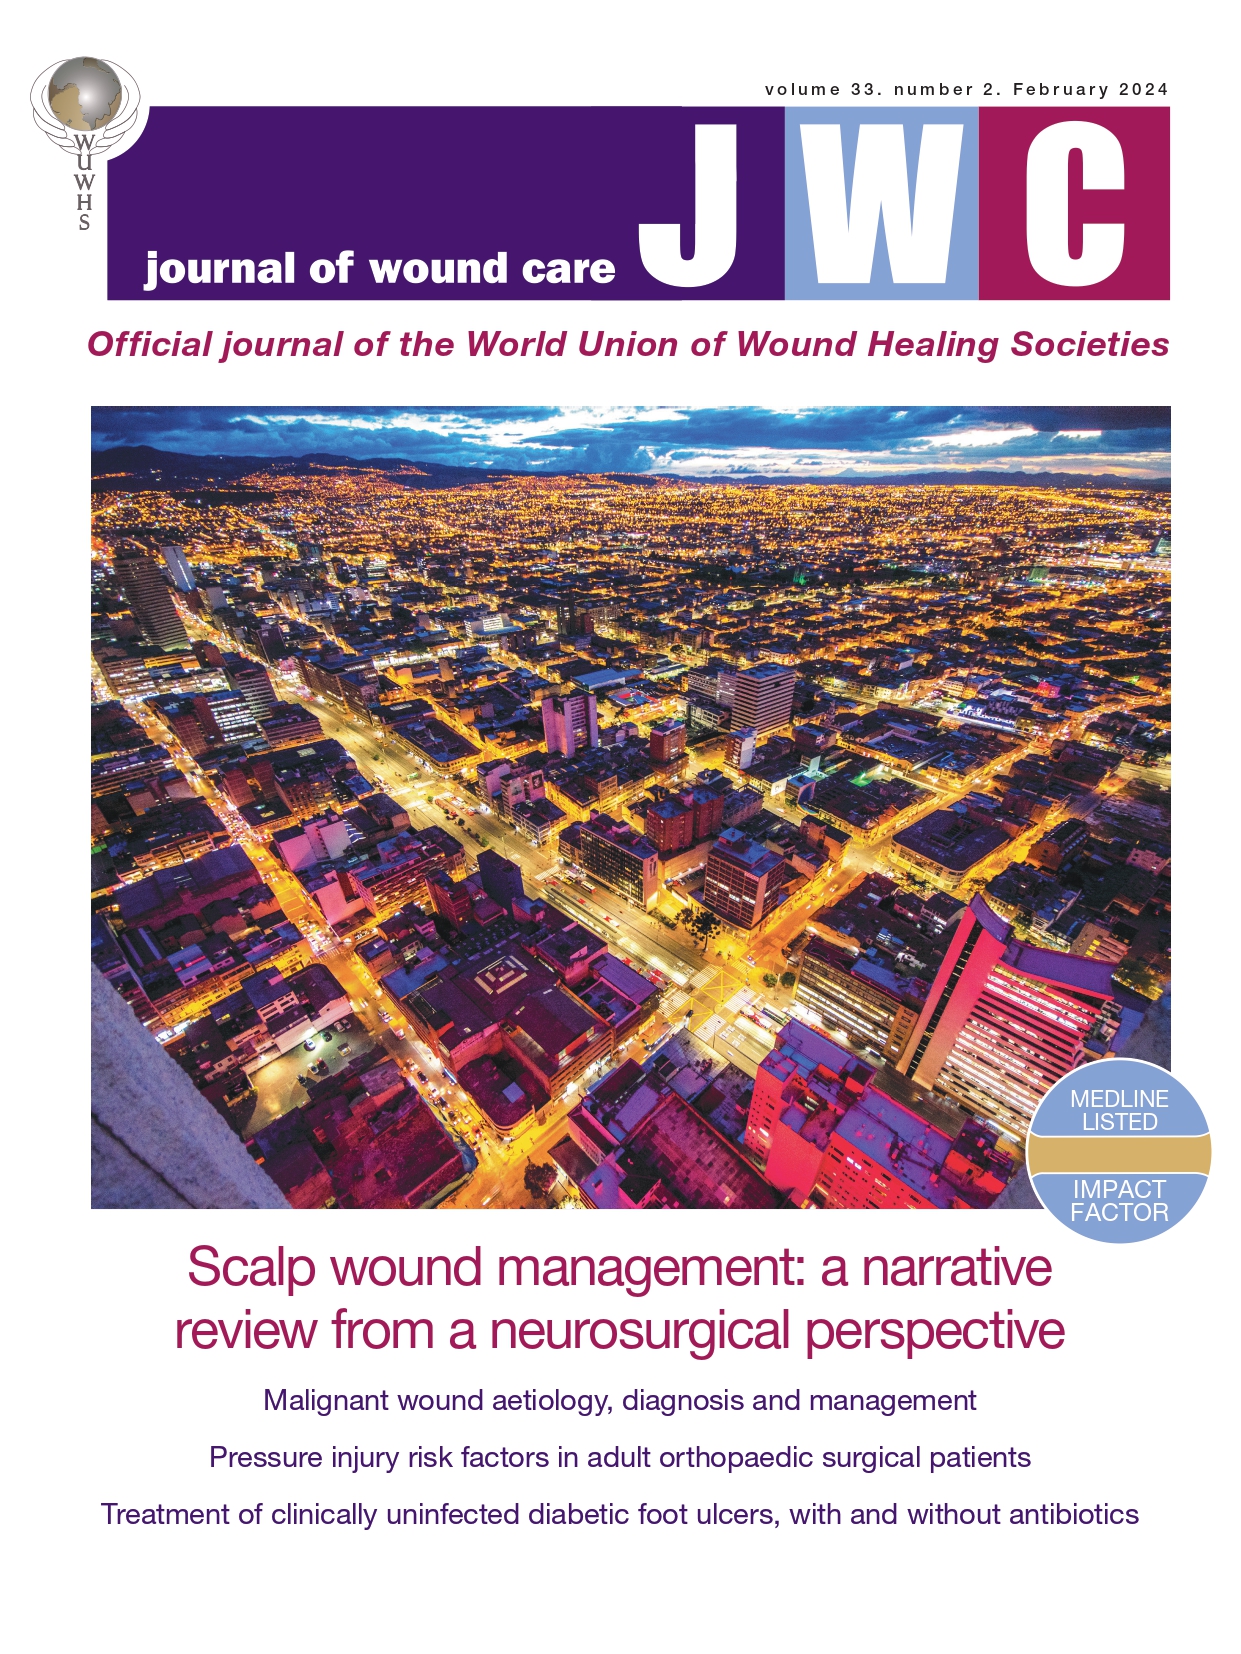 Journal of Wound Care